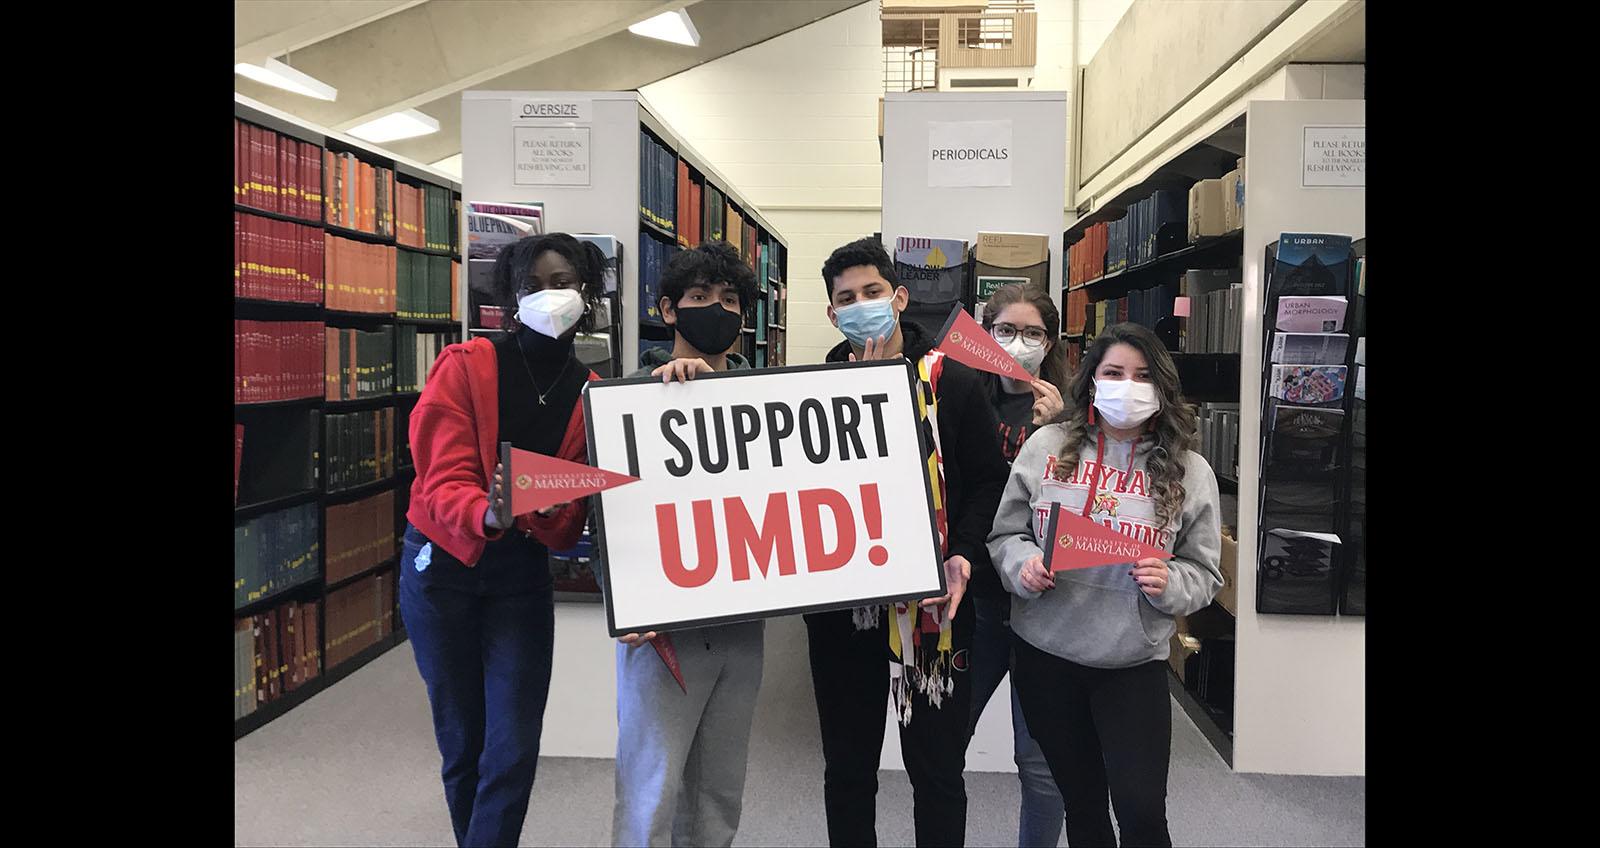 Students in the library with facemasks, holding a sign saying "I Support UMD"